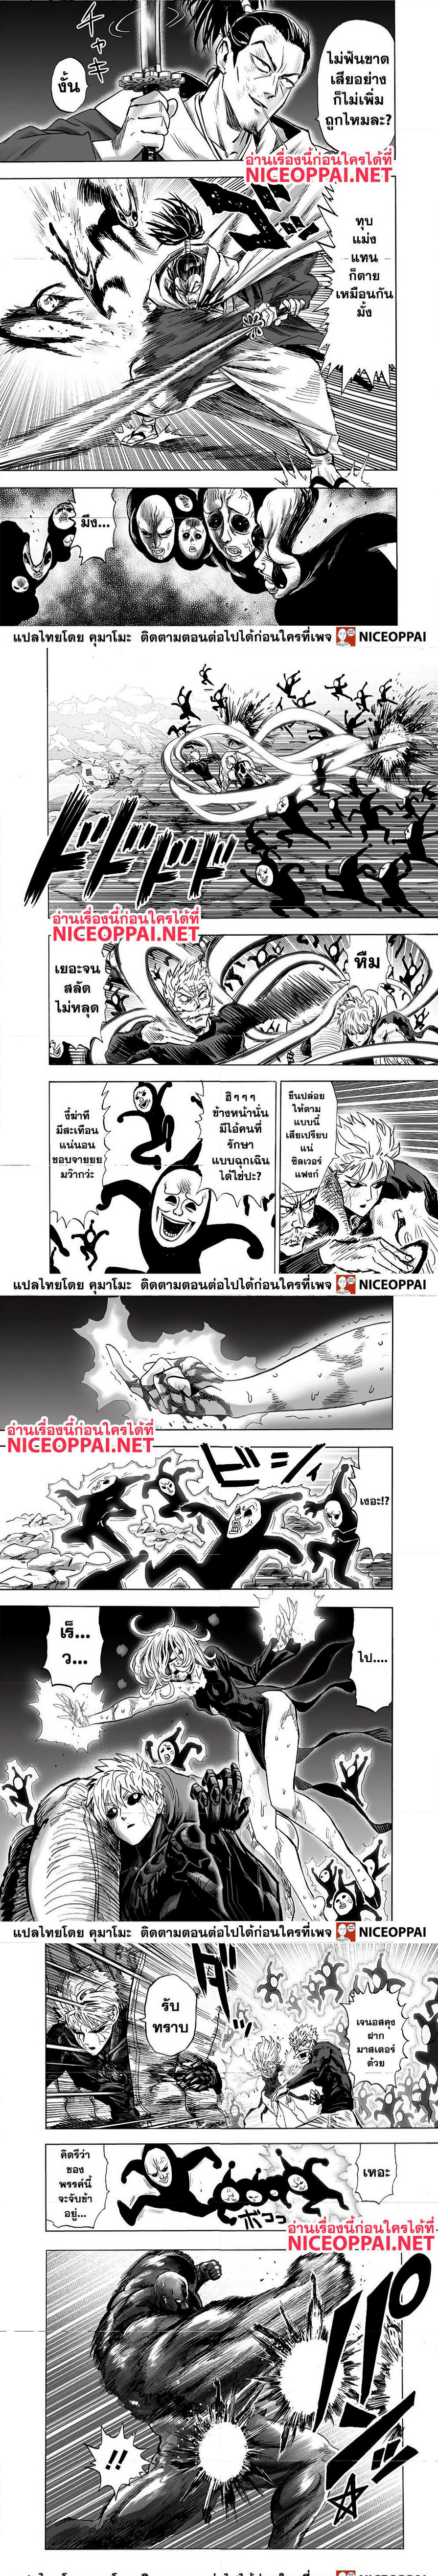 One Punch Man145 (6)